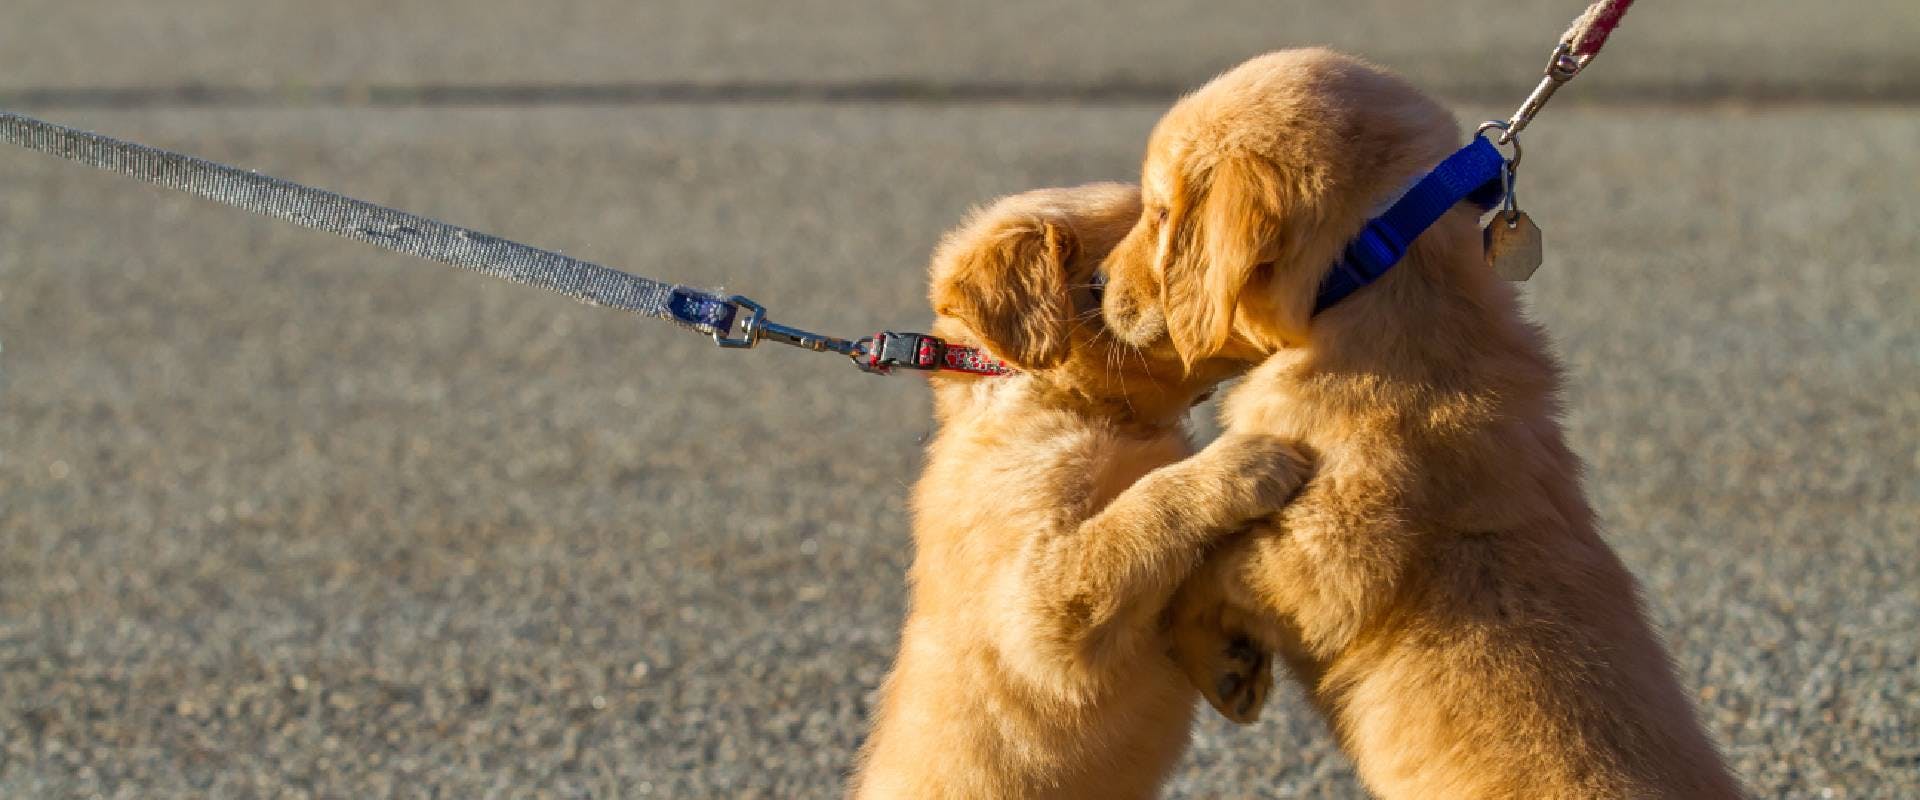 Two Golden Retriever puppies embracing